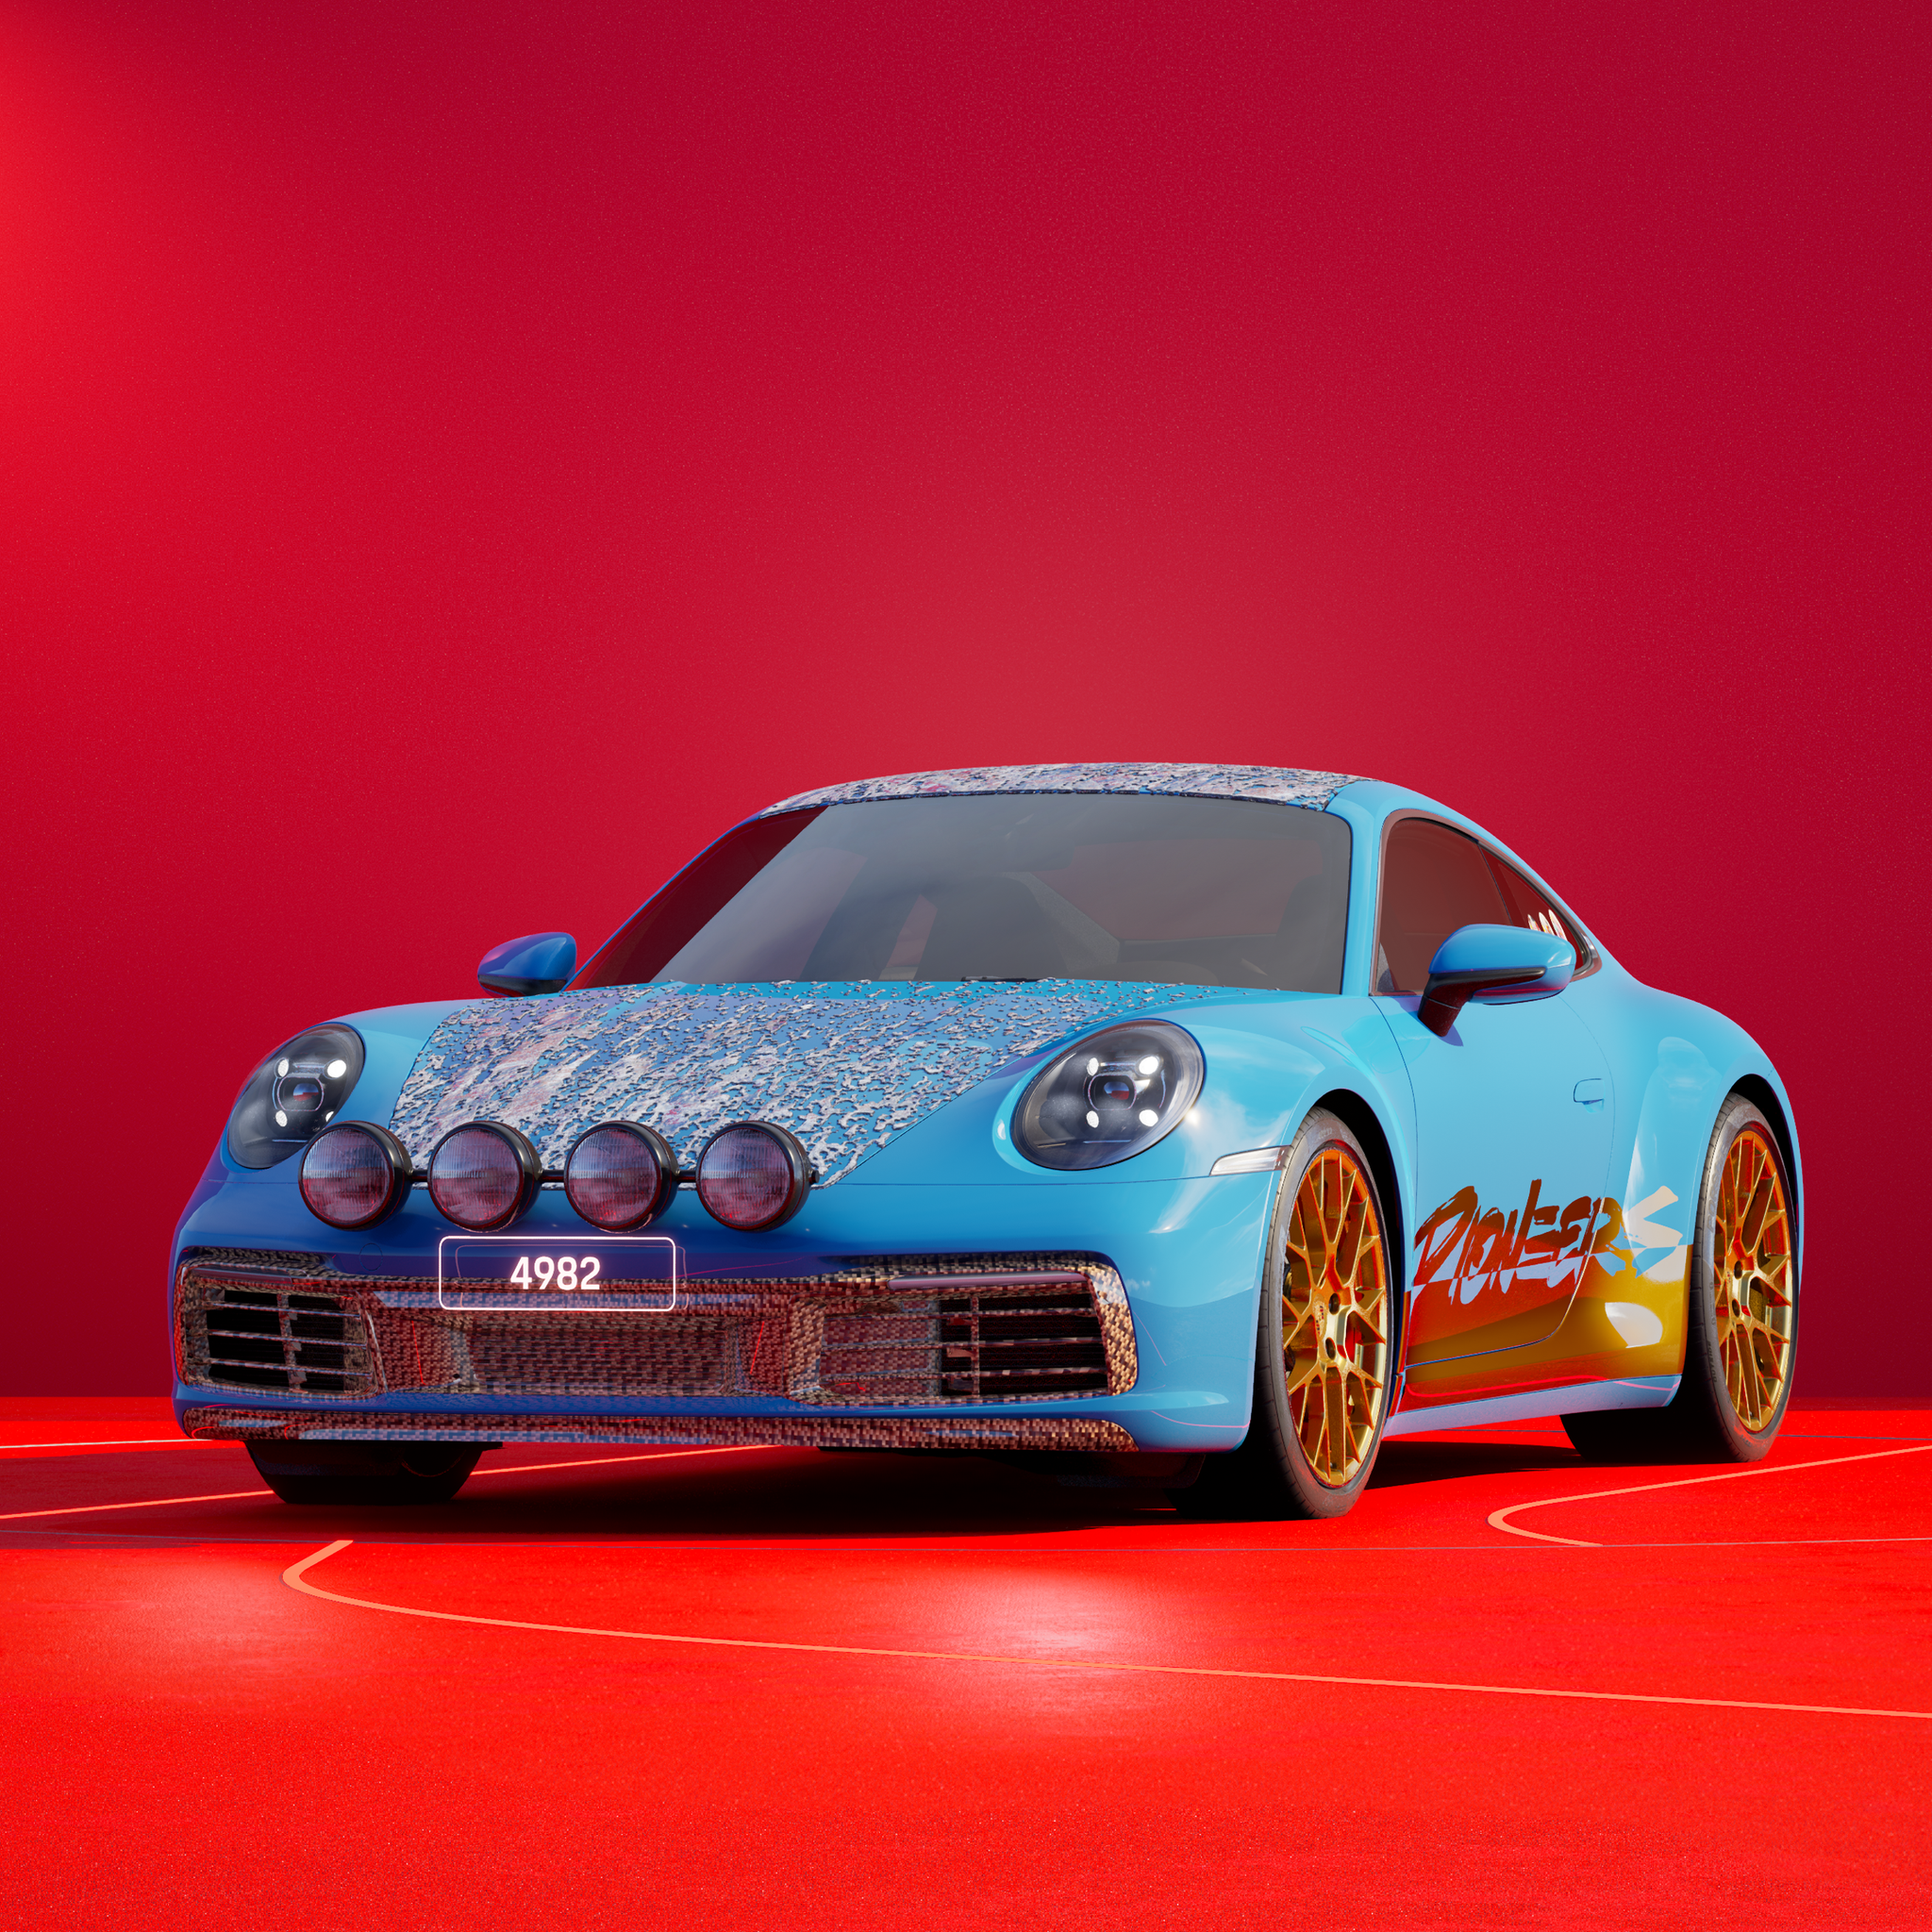 The PORSCHΞ 911 4982 image in phase